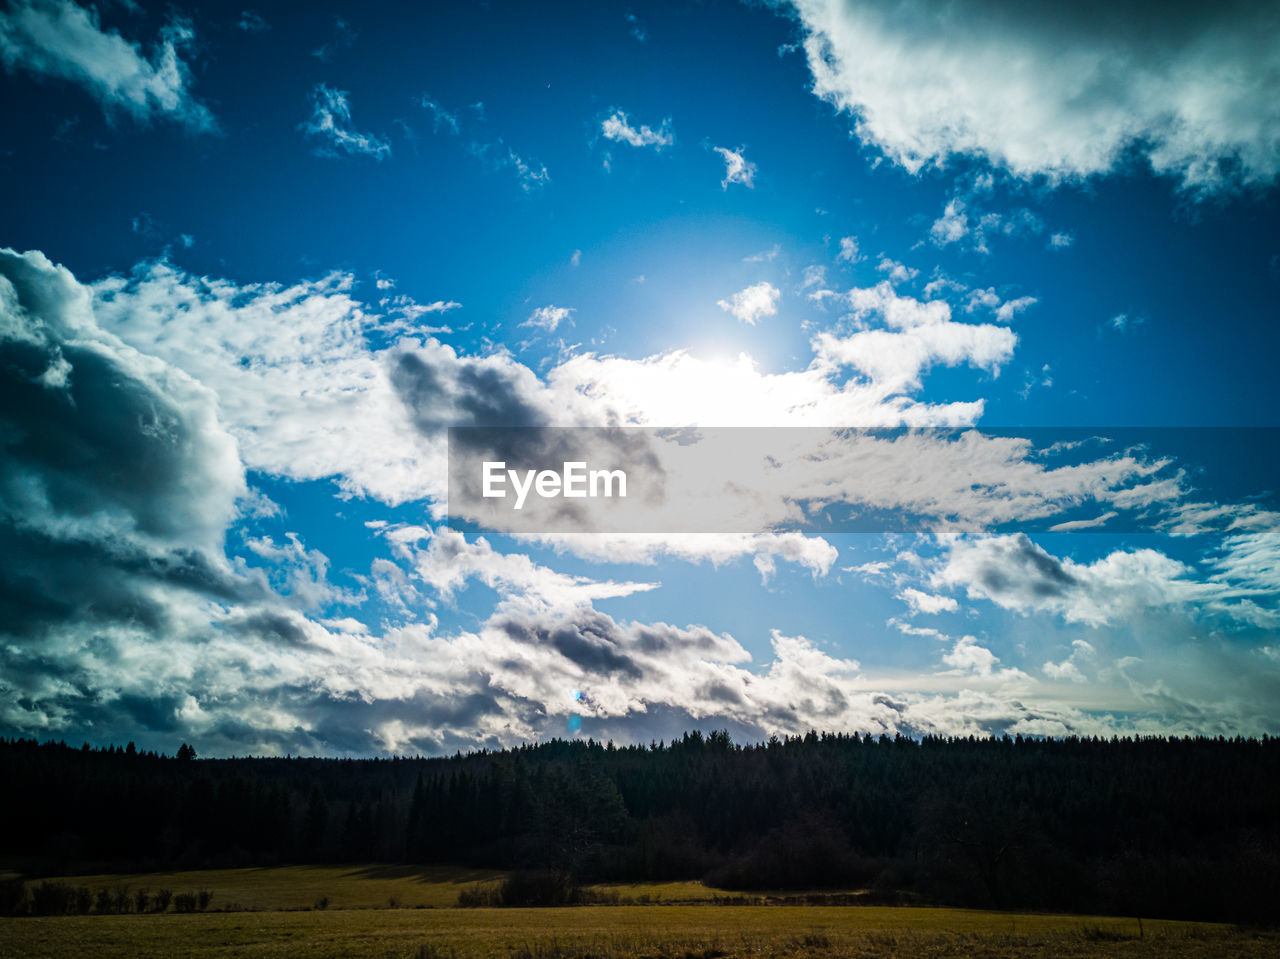 SCENIC VIEW OF LAND AGAINST BLUE SKY